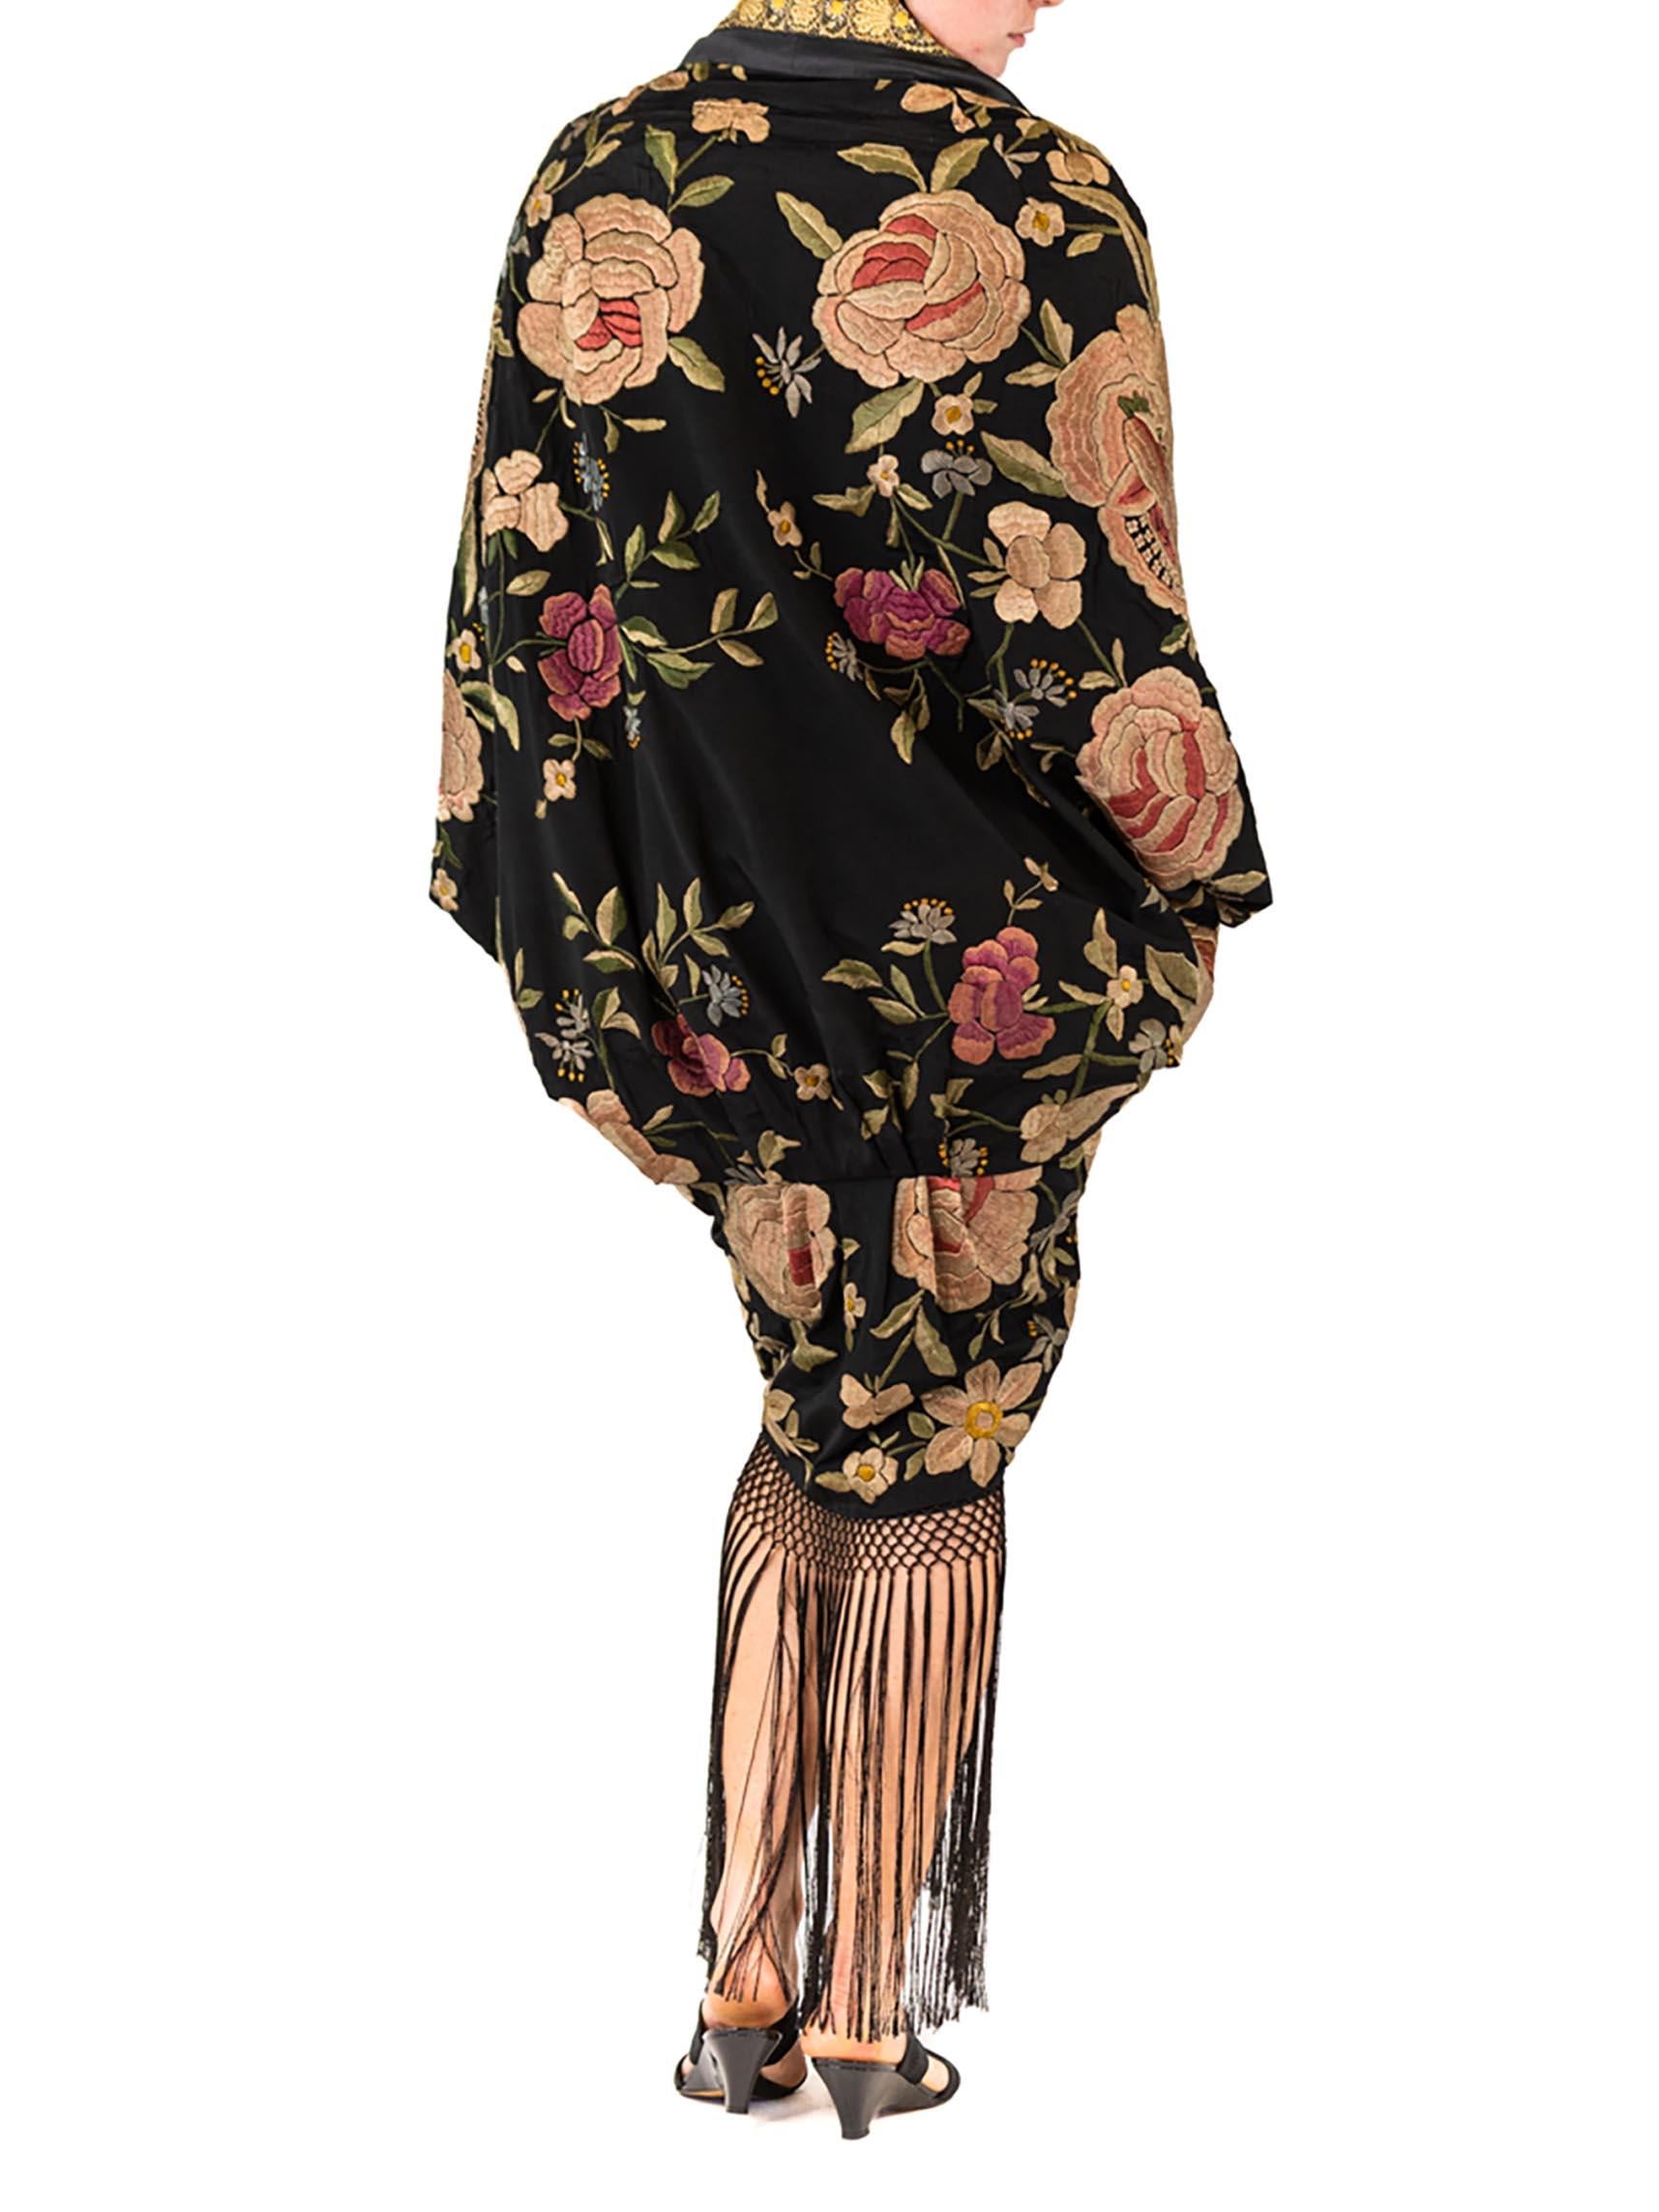 MORPHEW ATELIER Black Hand Embroidered Silk Floral Cocoon With Fringe And Vinta For Sale 5